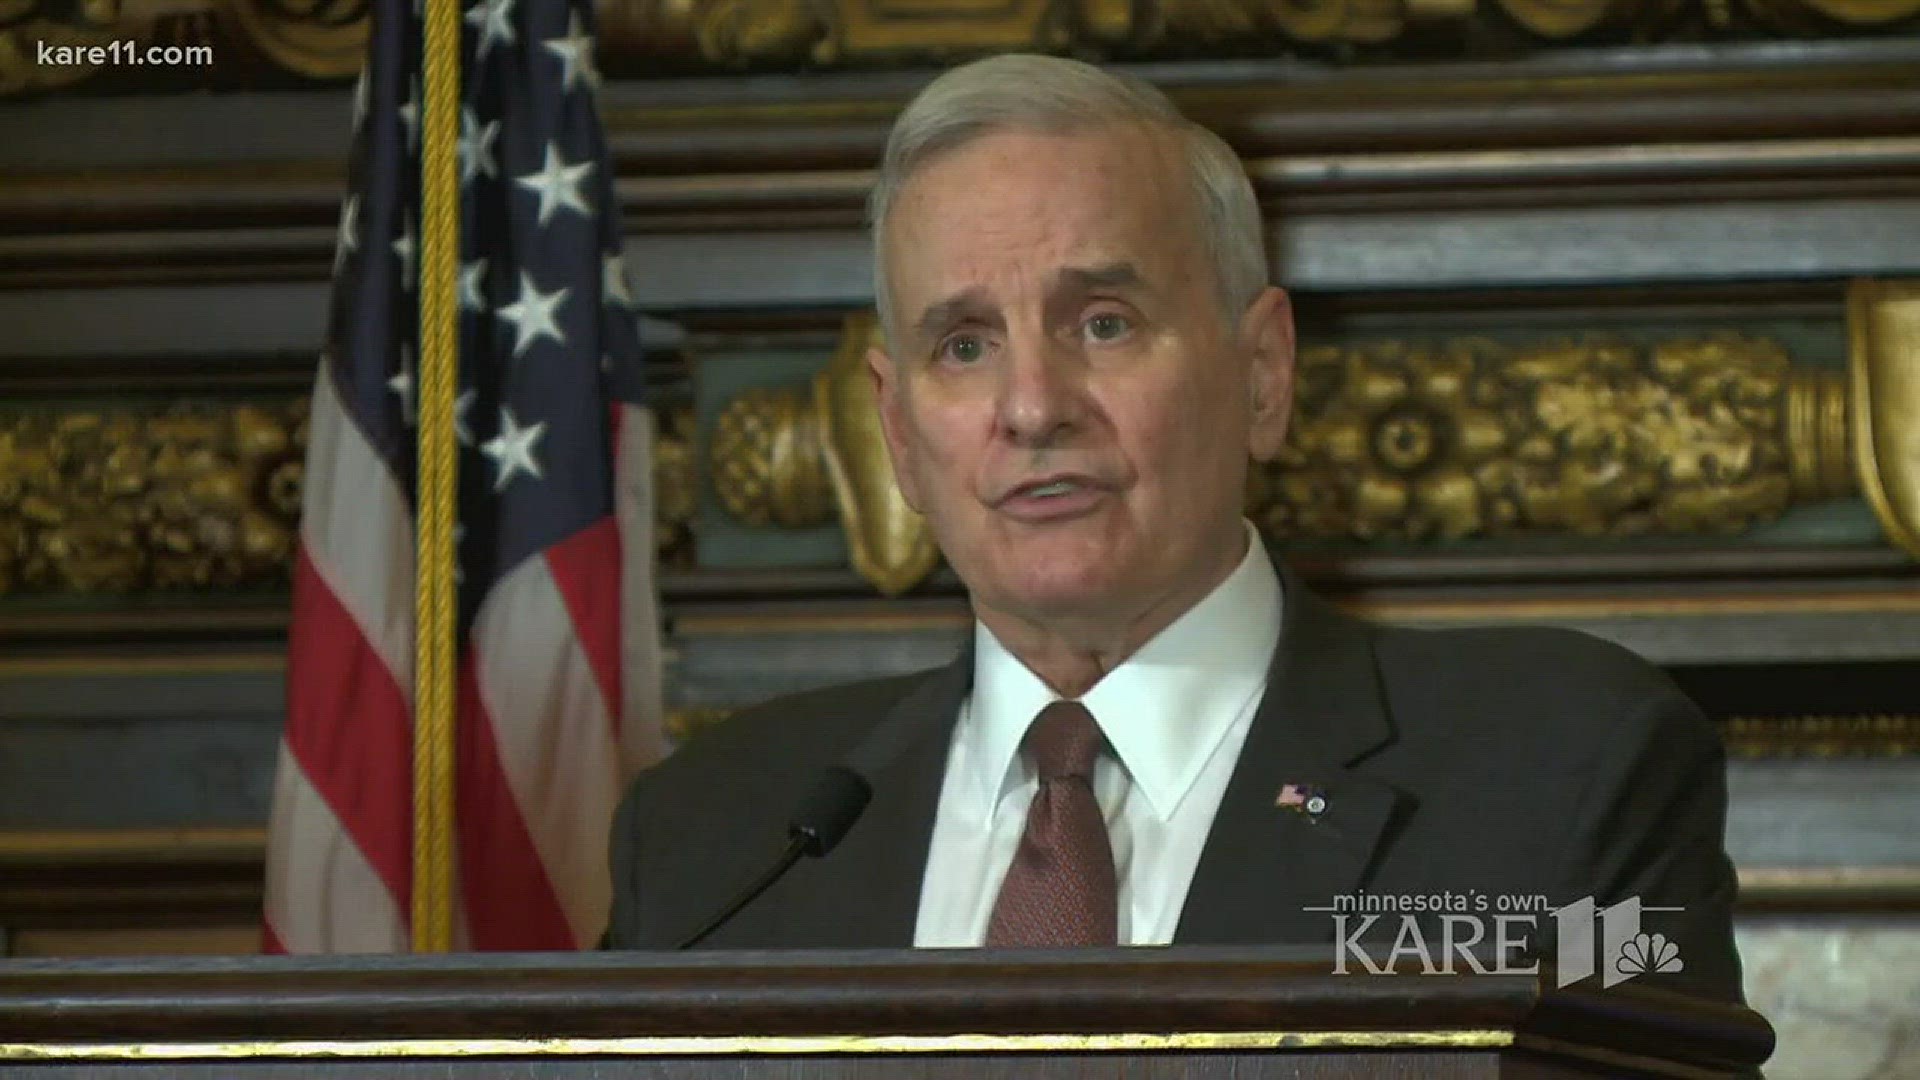 Dayton says he was shocked by a KARE 11 report that found most Minnesota school districts fail to follow government testing recommendations - if they test at all.https://kare11.tv/2jJ50cM